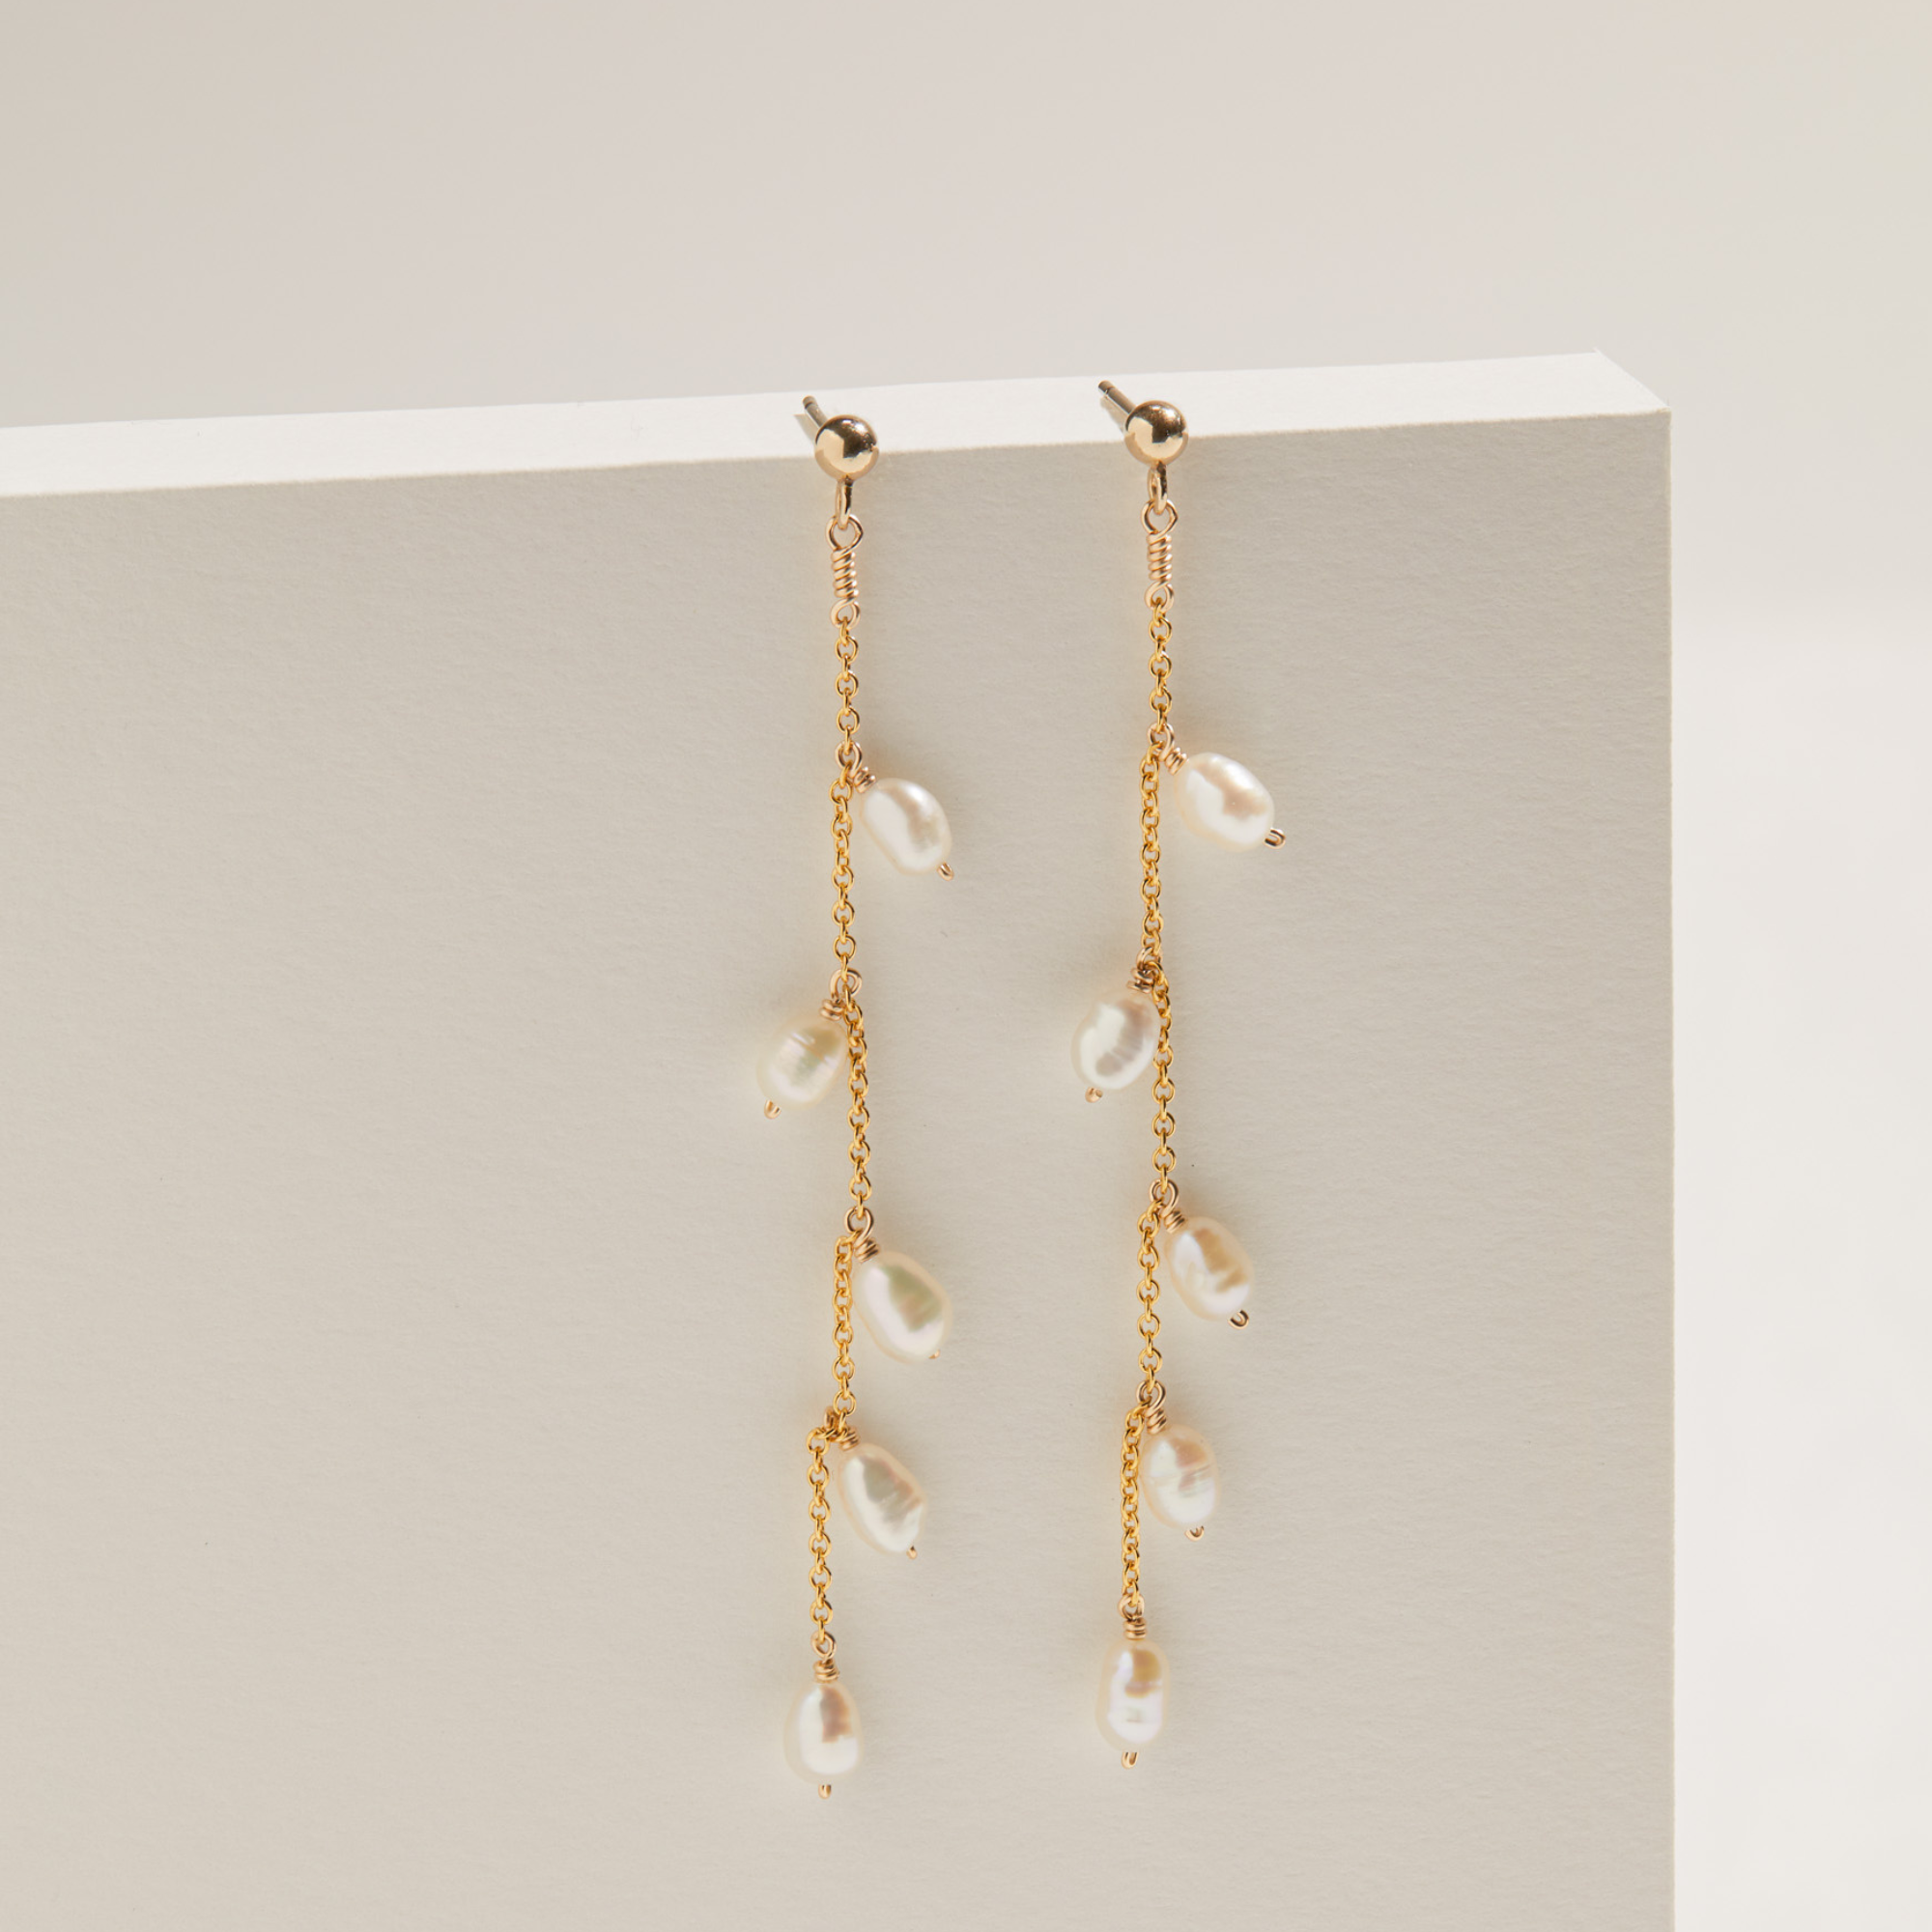 Gold seed pearl drop earrings hanging off a white ledge